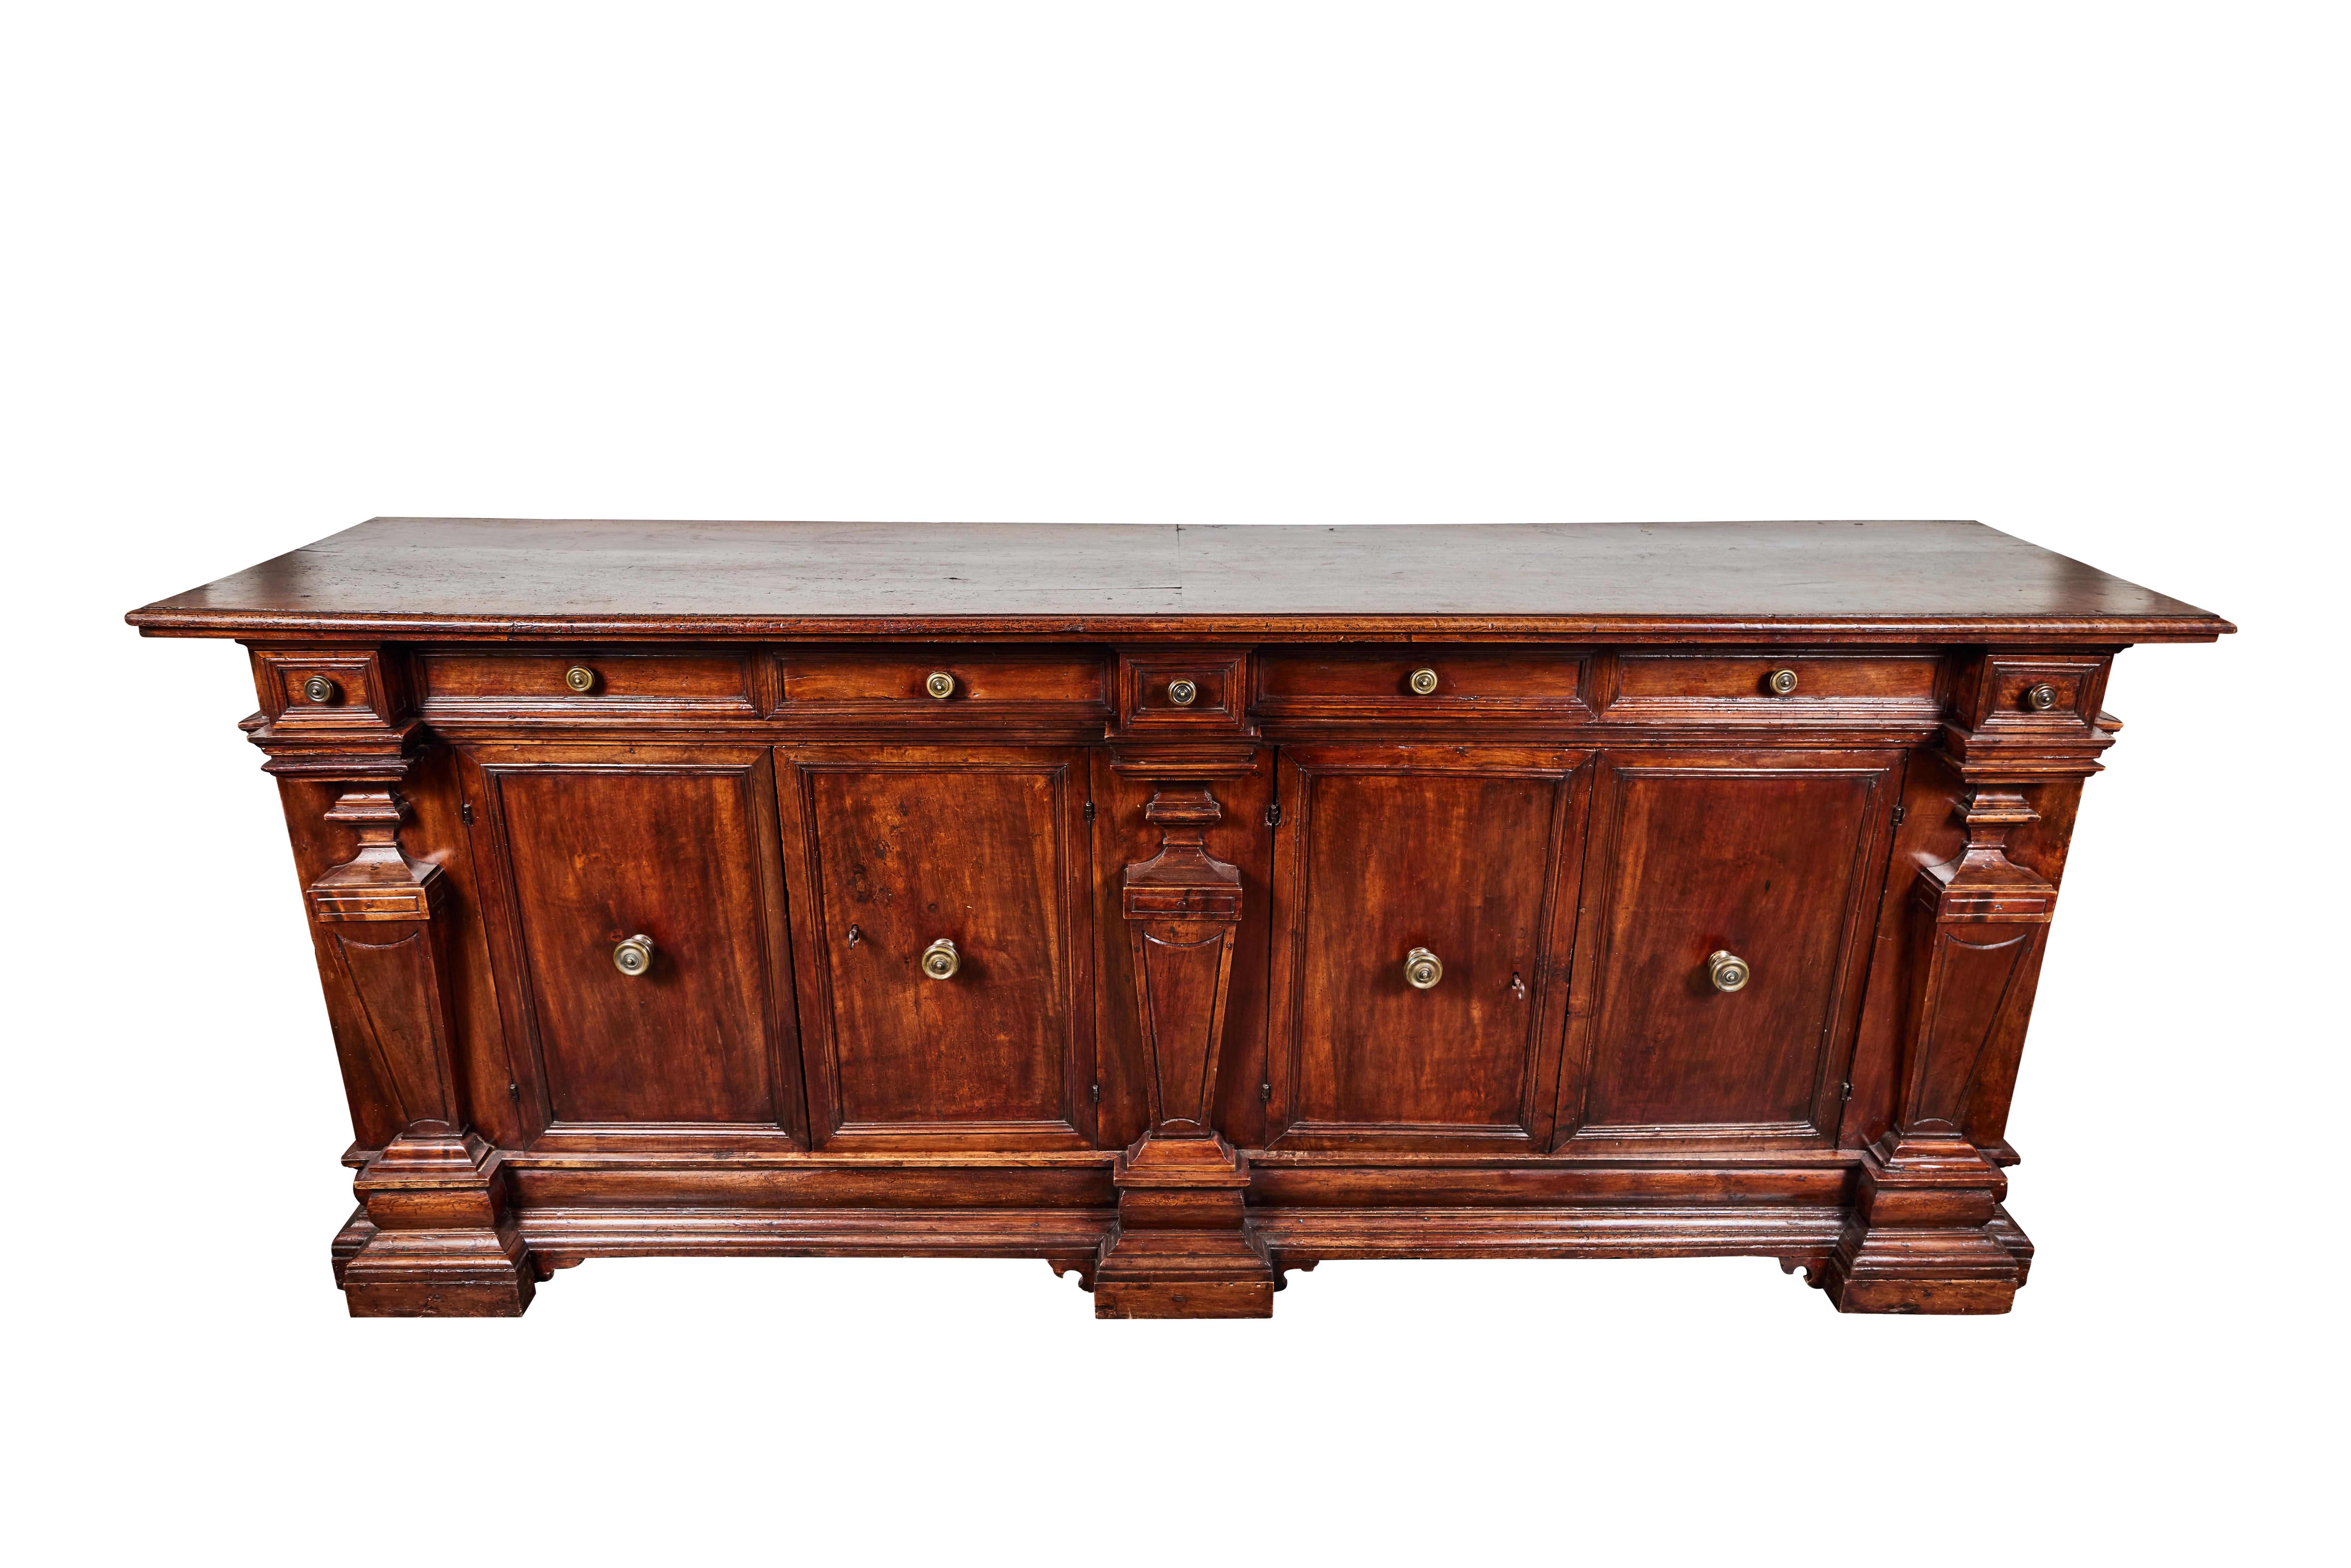 A huge, beautifully carved, circa 1800 solid walnut seven-drawer, four-door Tuscan buffet featuring paneled woodwork, and a series of faux pilasters along the facade. The piece retaining it's original, gilt bronze hardware.